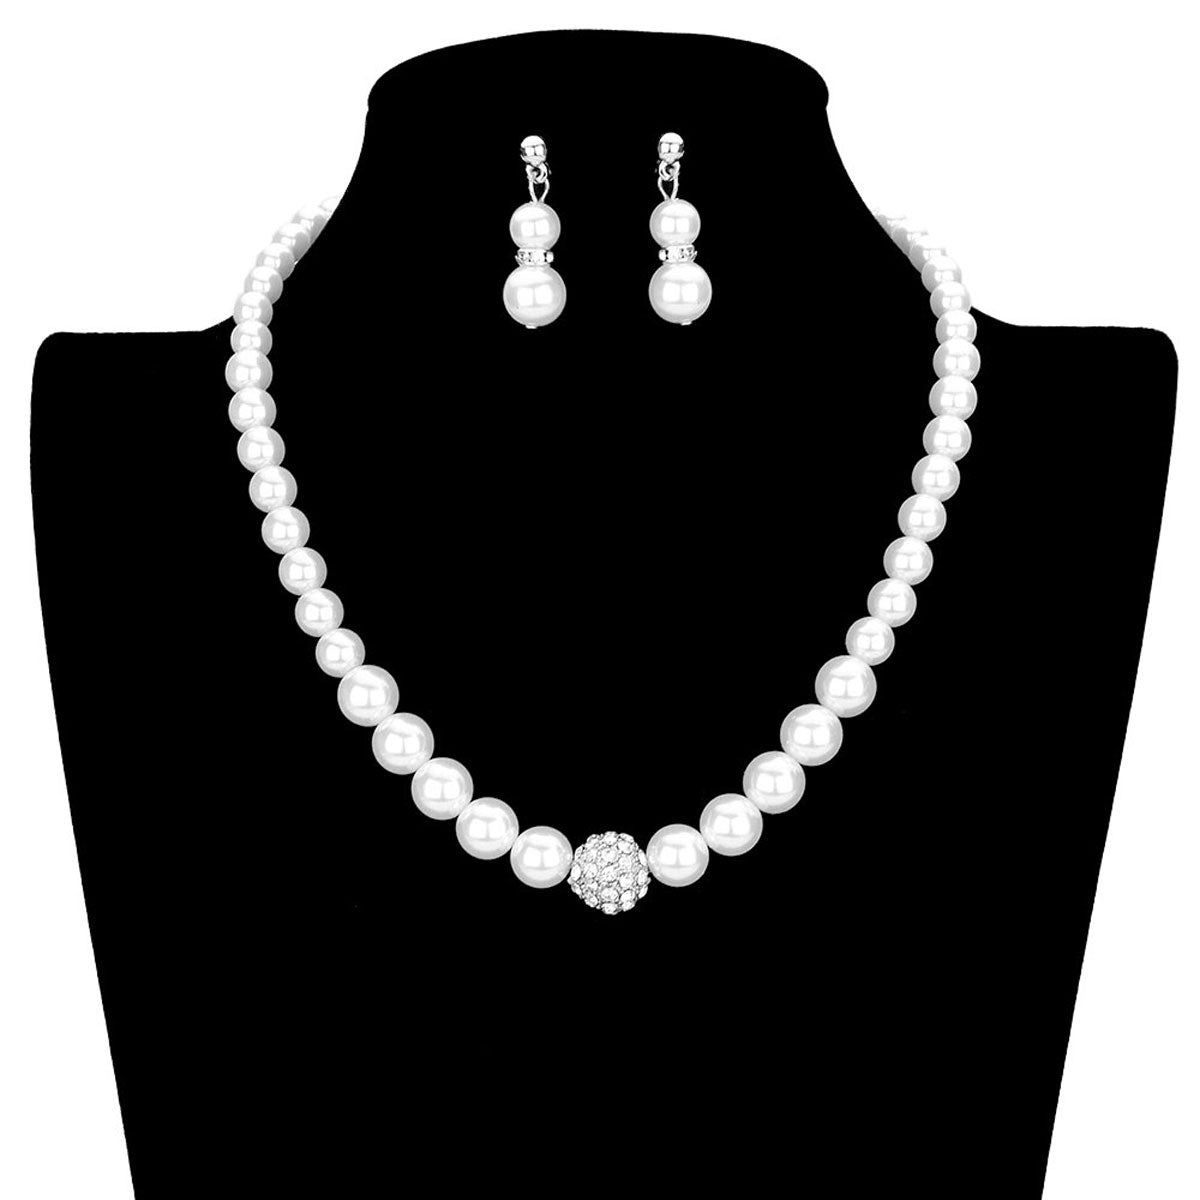 White Pave Ball Pearl Strand Necklace. These necklace earrings sets are Elegant. Beautifully crafted design adds a glow to your gorgeous outfit. These pearl themed necklace that will create you glamorous look. Suitable for wear Party, Wedding, Engagement, Anniversary, Date Night or any special events. Perfect Birthday, Anniversary, Mother's Day & Graduation Gift, Prom Jewelry, Just Because Gift, Thank you Gift.